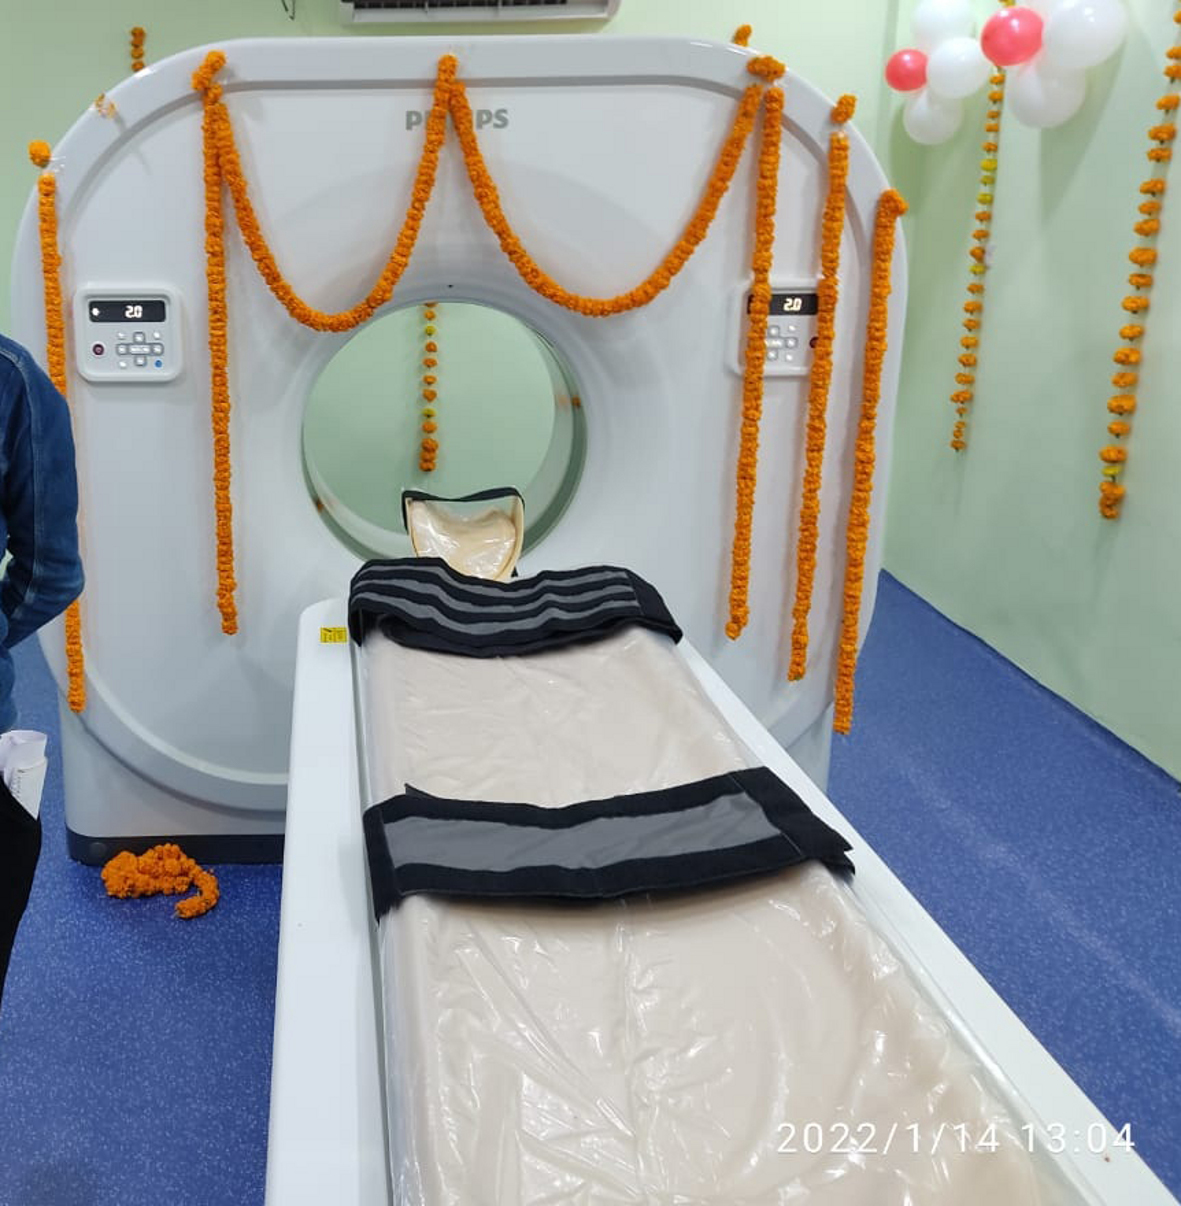 CT scan facility will be available, free examination of BPL patients will be done